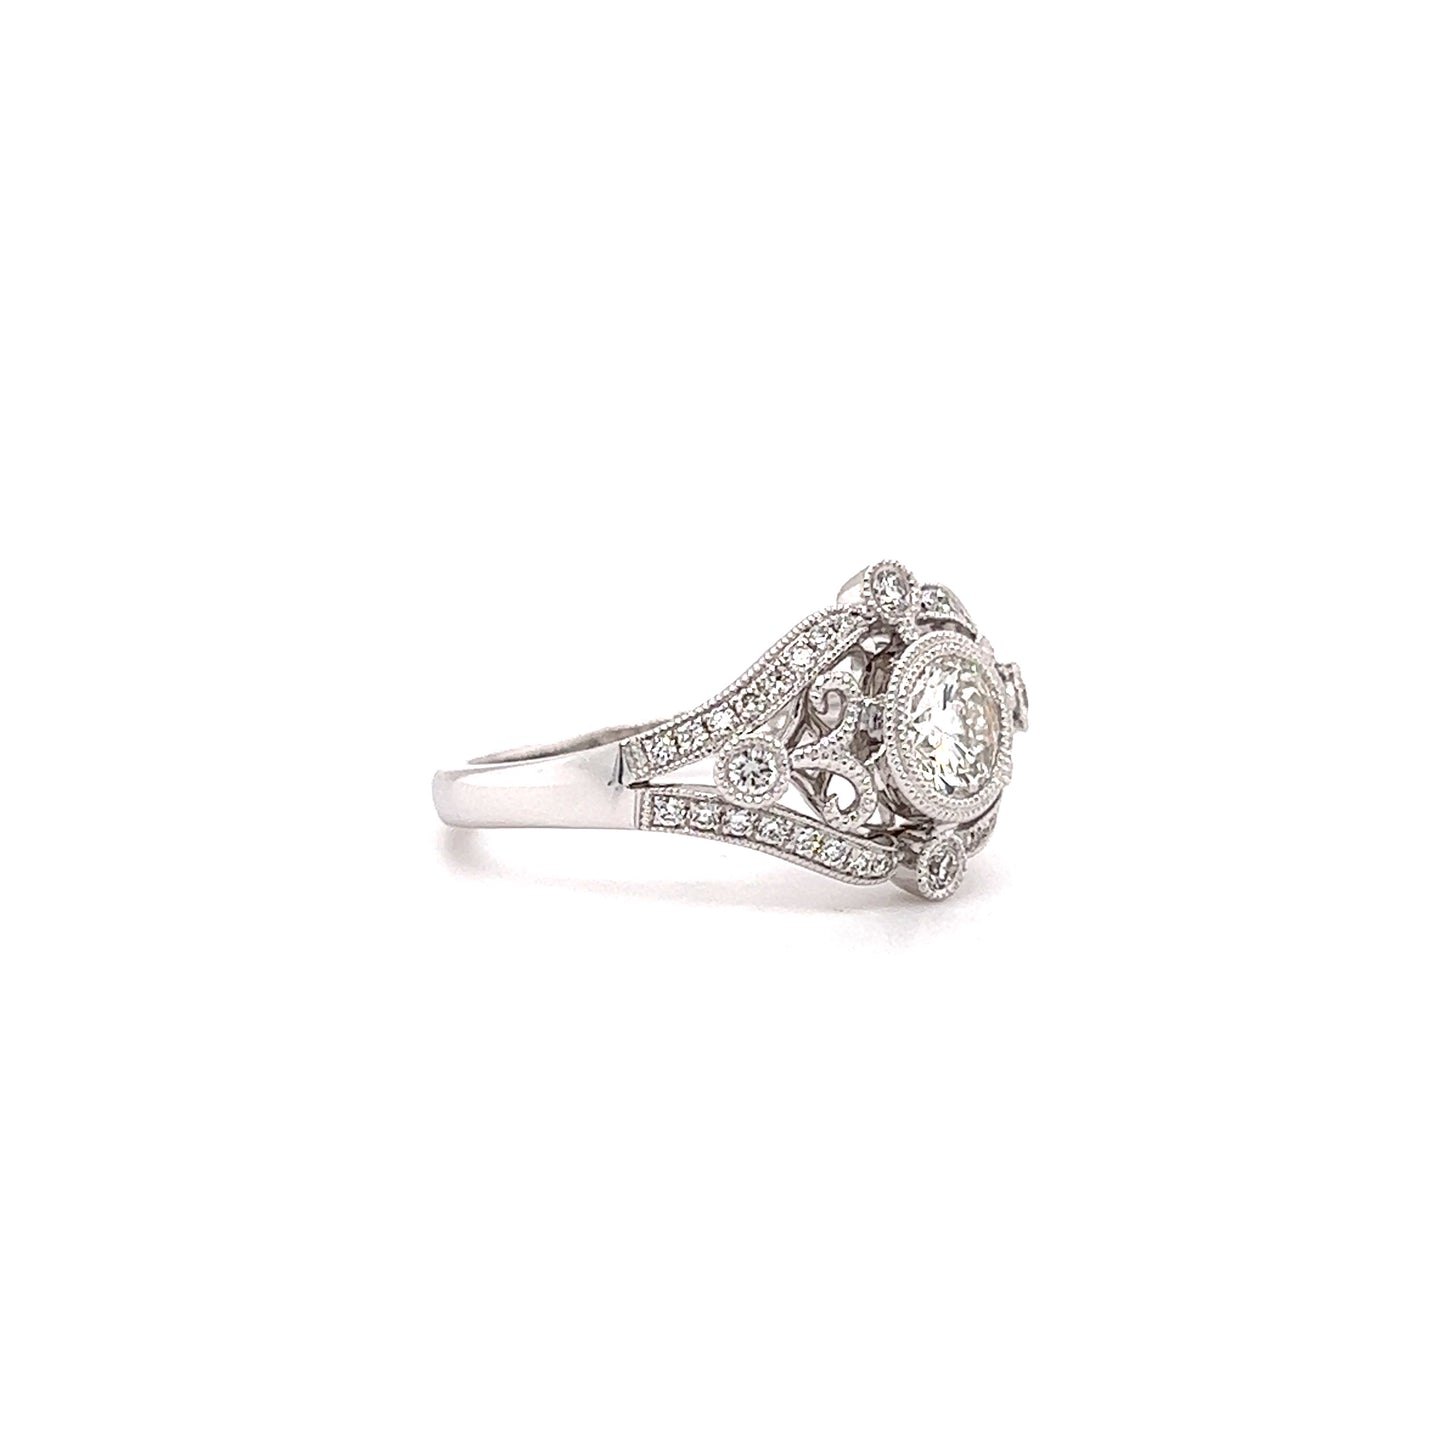 Round Diamond Ring with Side Diamonds and Filigree in 14K White Gold Left Side View